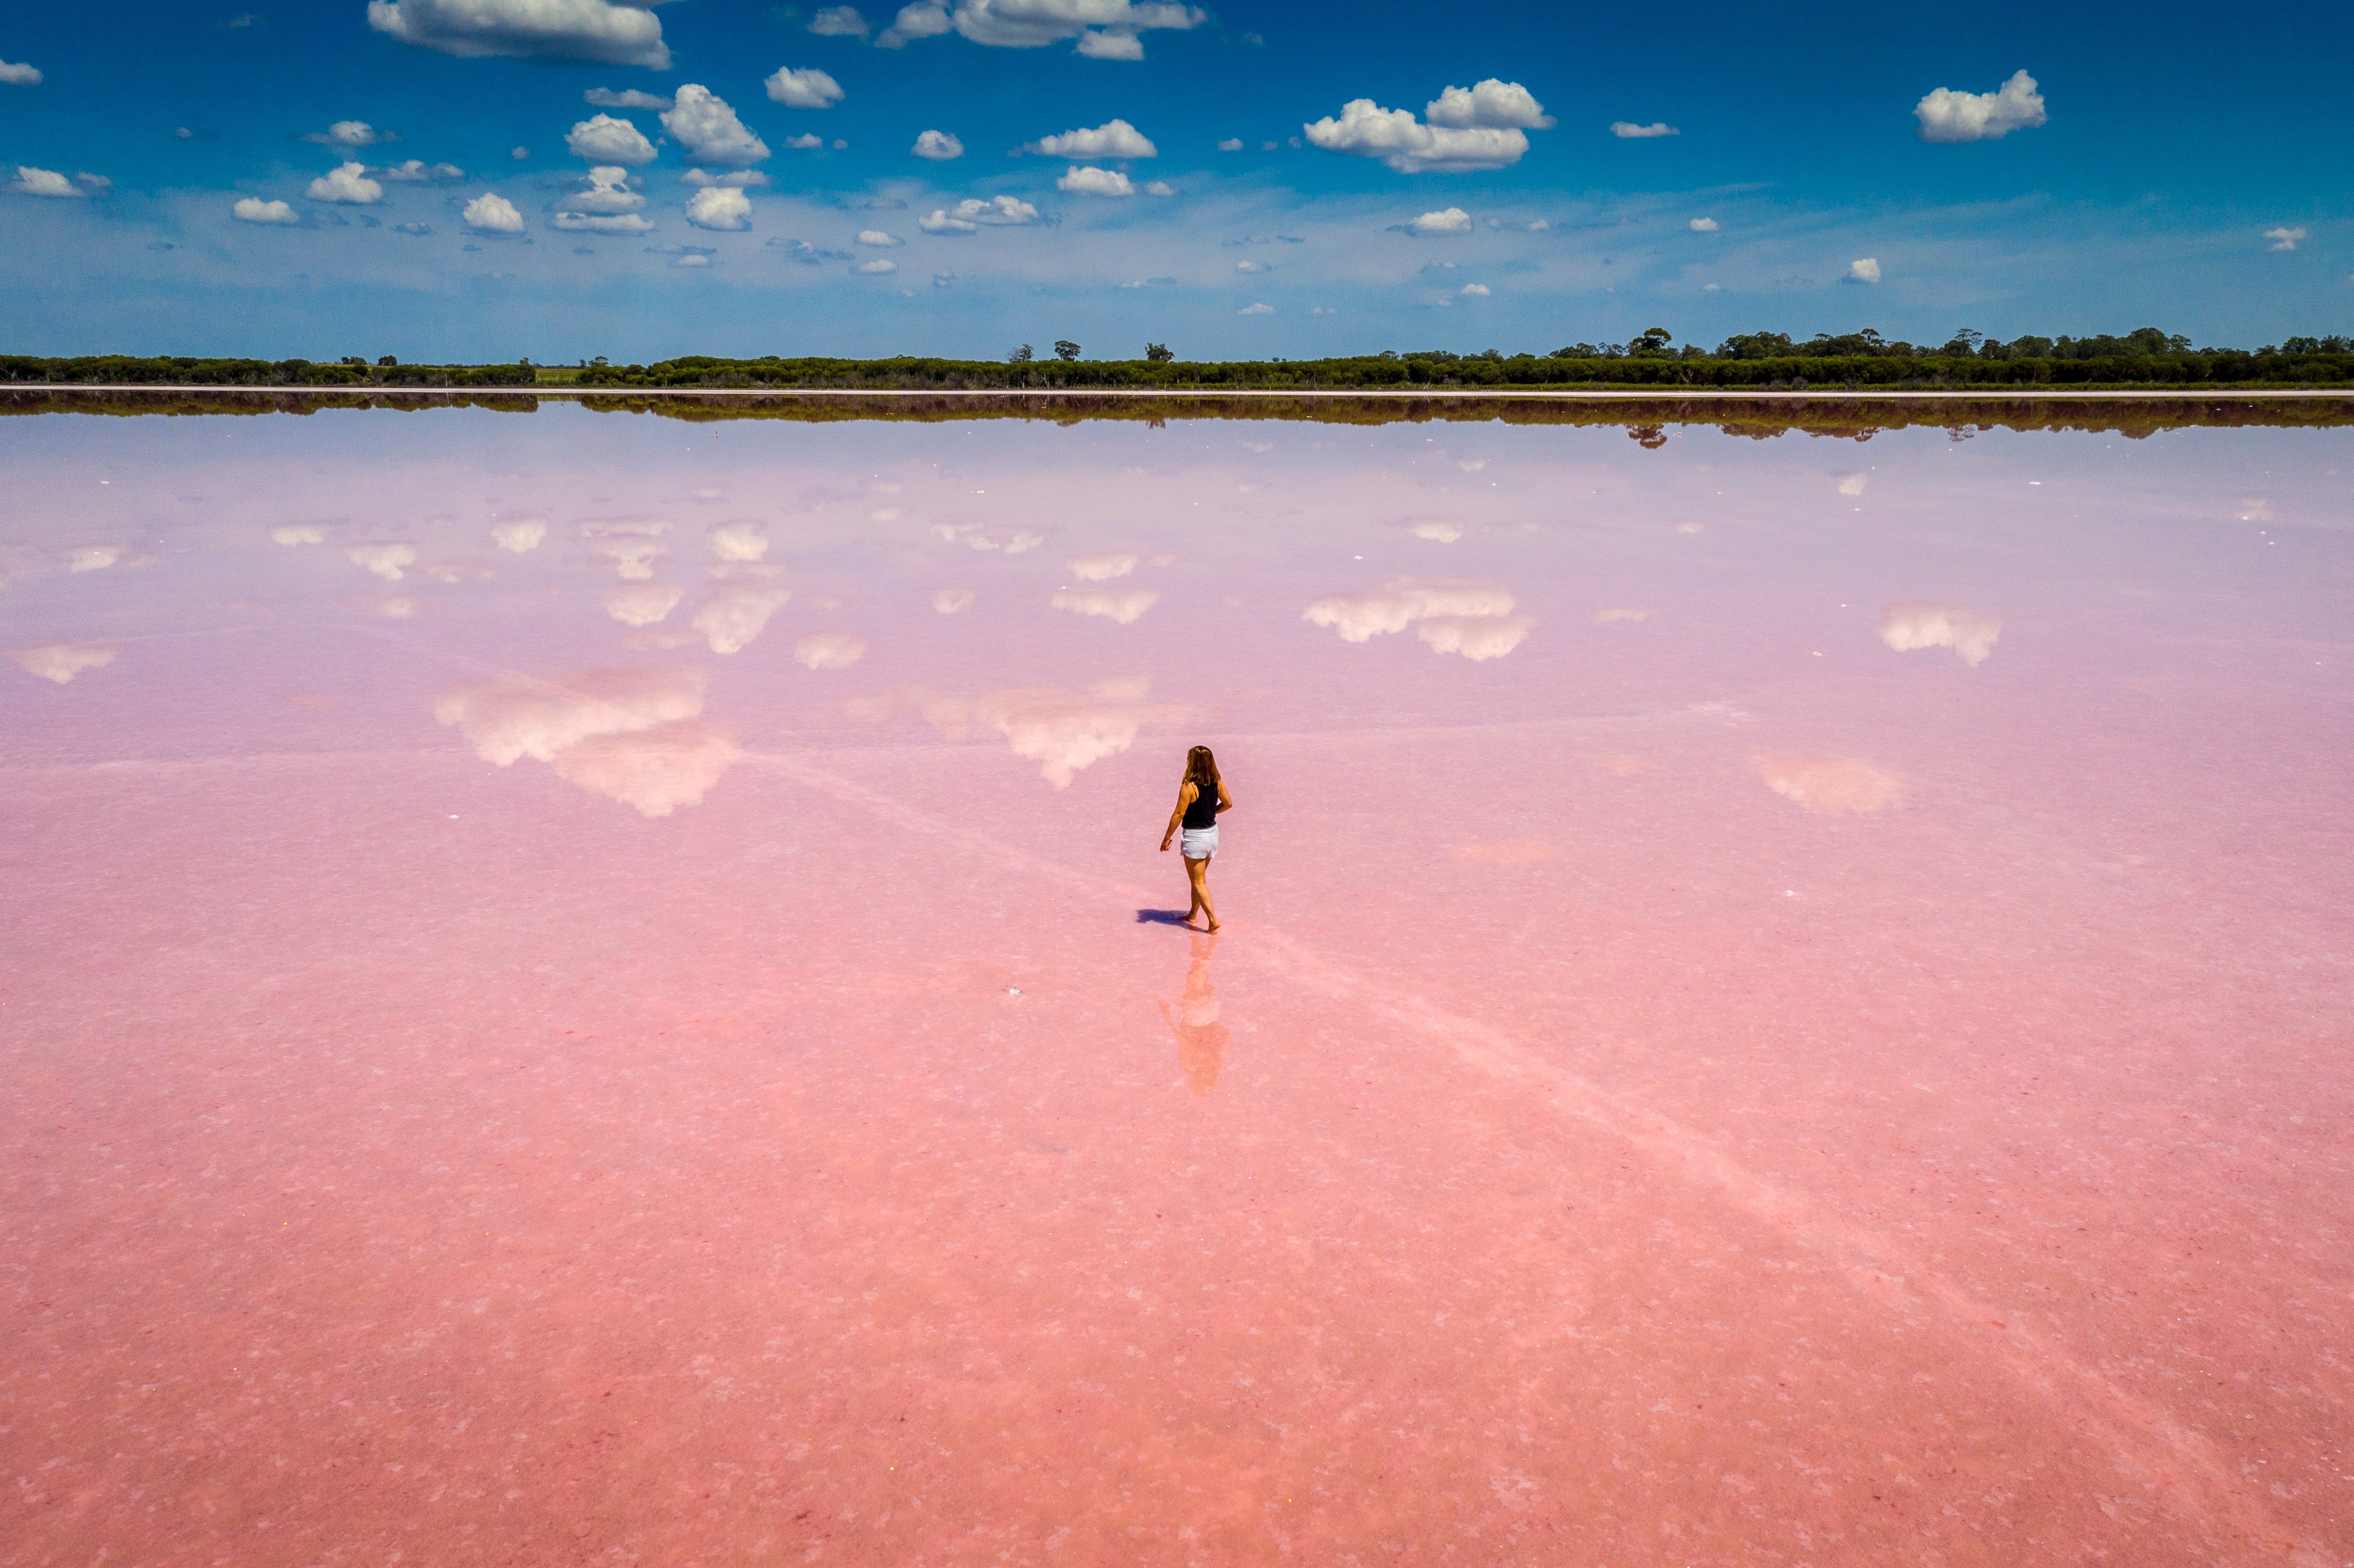 Pink Lakes - Rare Natural Wonders - Places To See In Your Lifetime